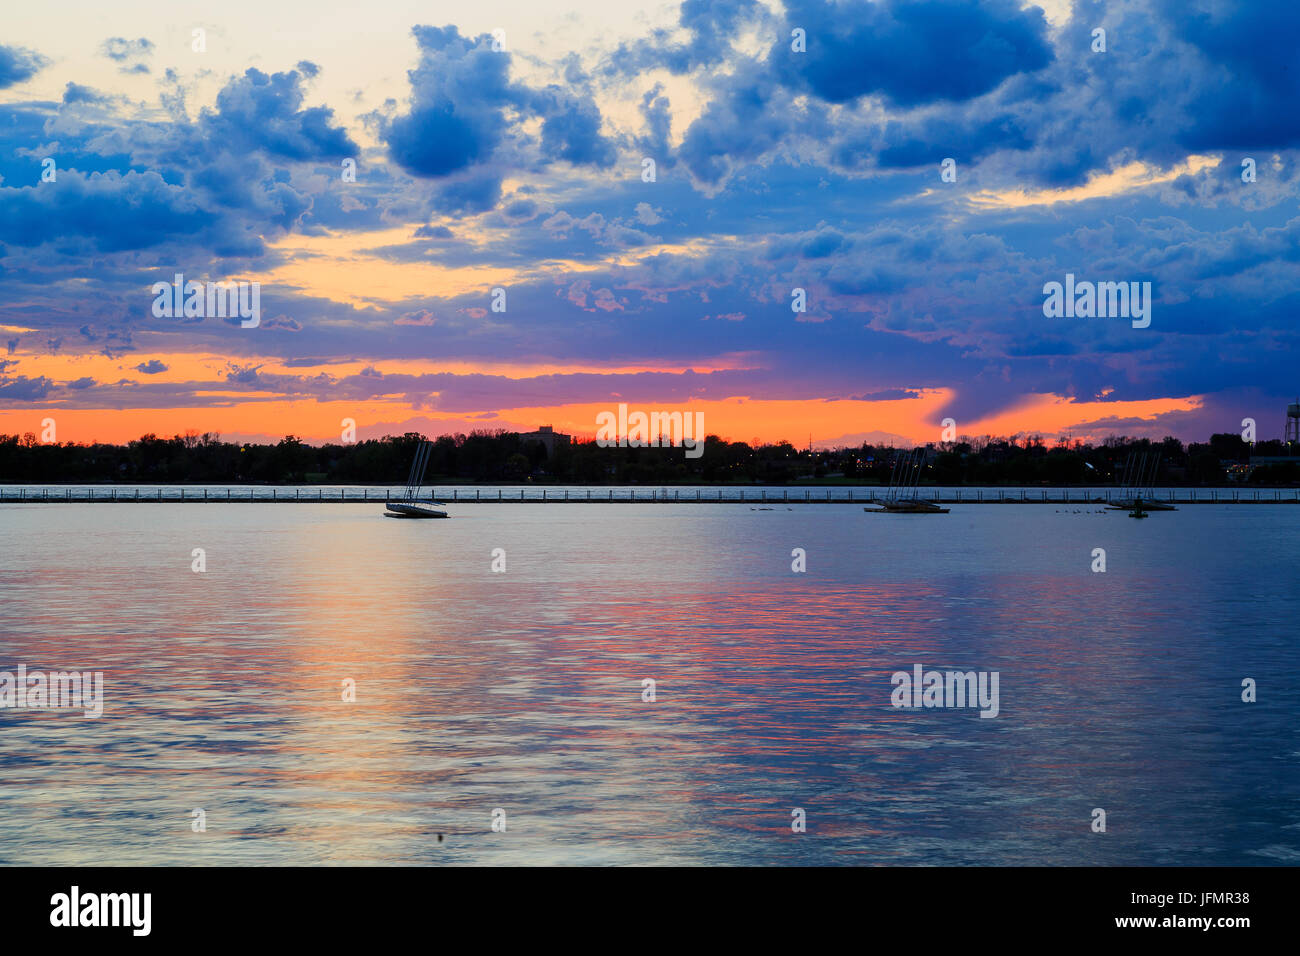 Boats, rocky shore, sunset on Lake Erie looking from Buffalo Park system. Sky is blue with orange ting. Stock Photo